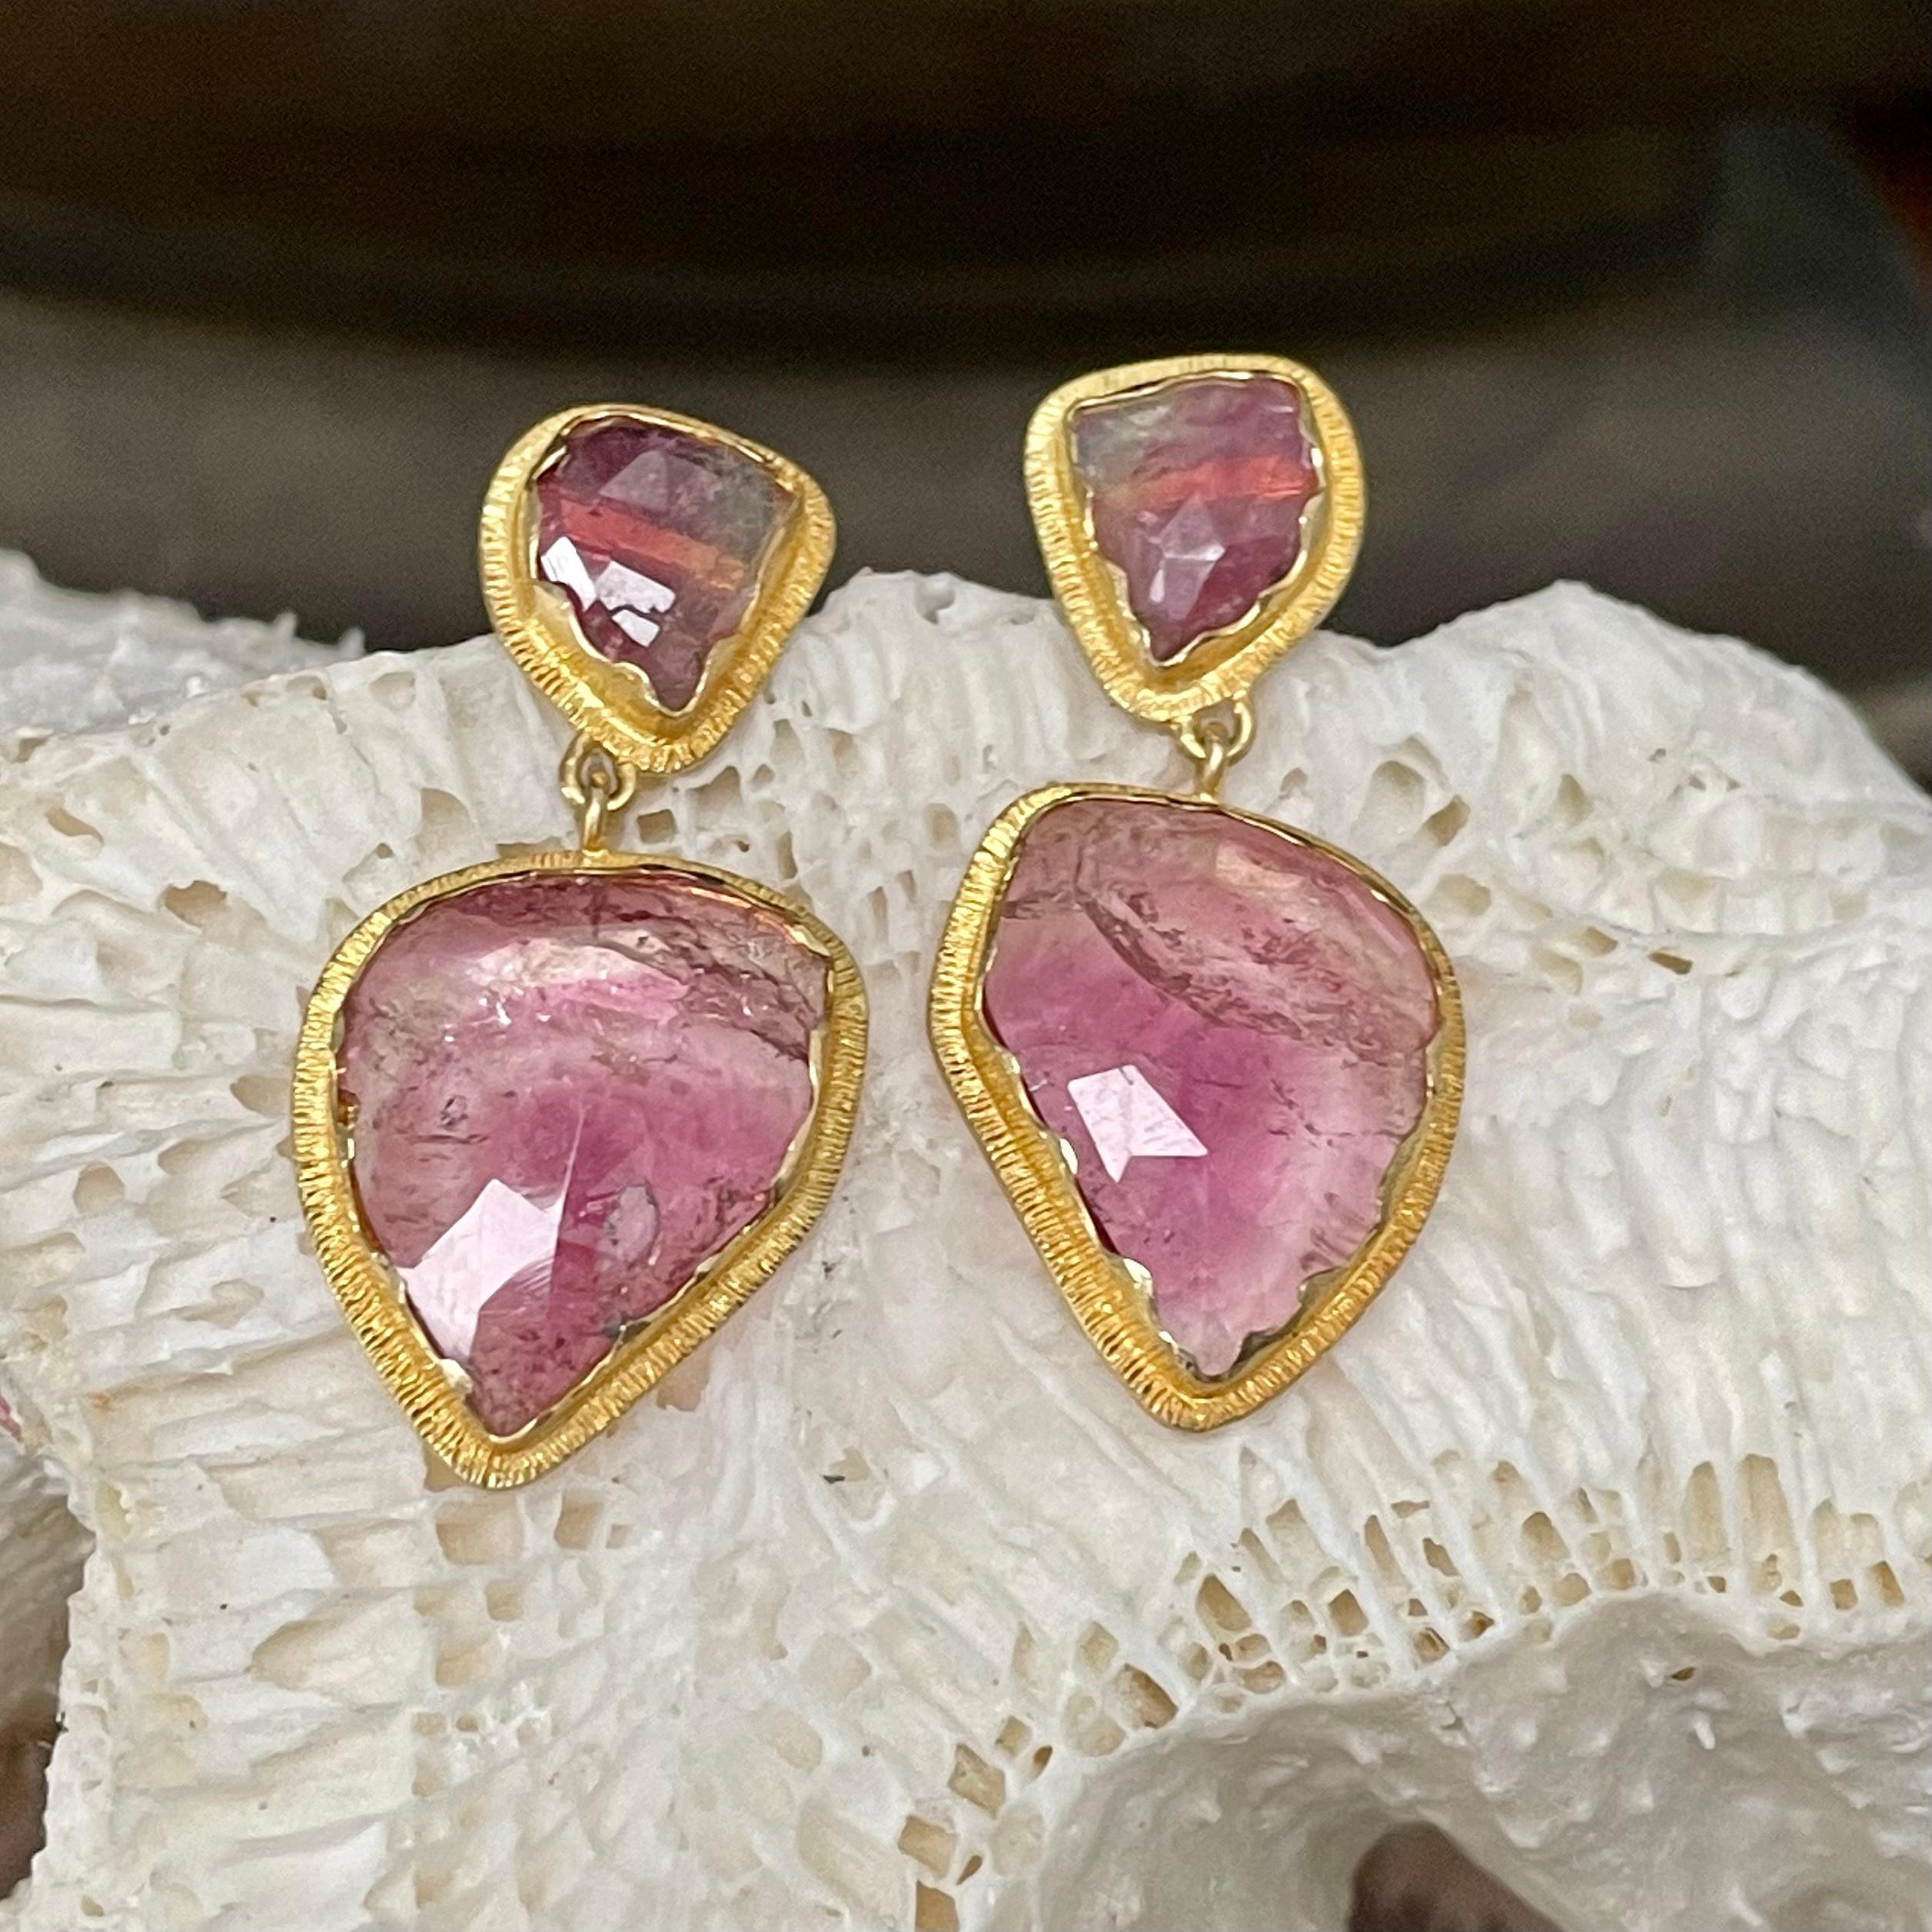 Organically shaped 12 x 16 mm variegated rose-cut watermelon tourmaline slices are set in scalloped 18K gold bezels with line texture surrounding  suspended below smaller similar posts in this one of a kind design.  Spectacular !